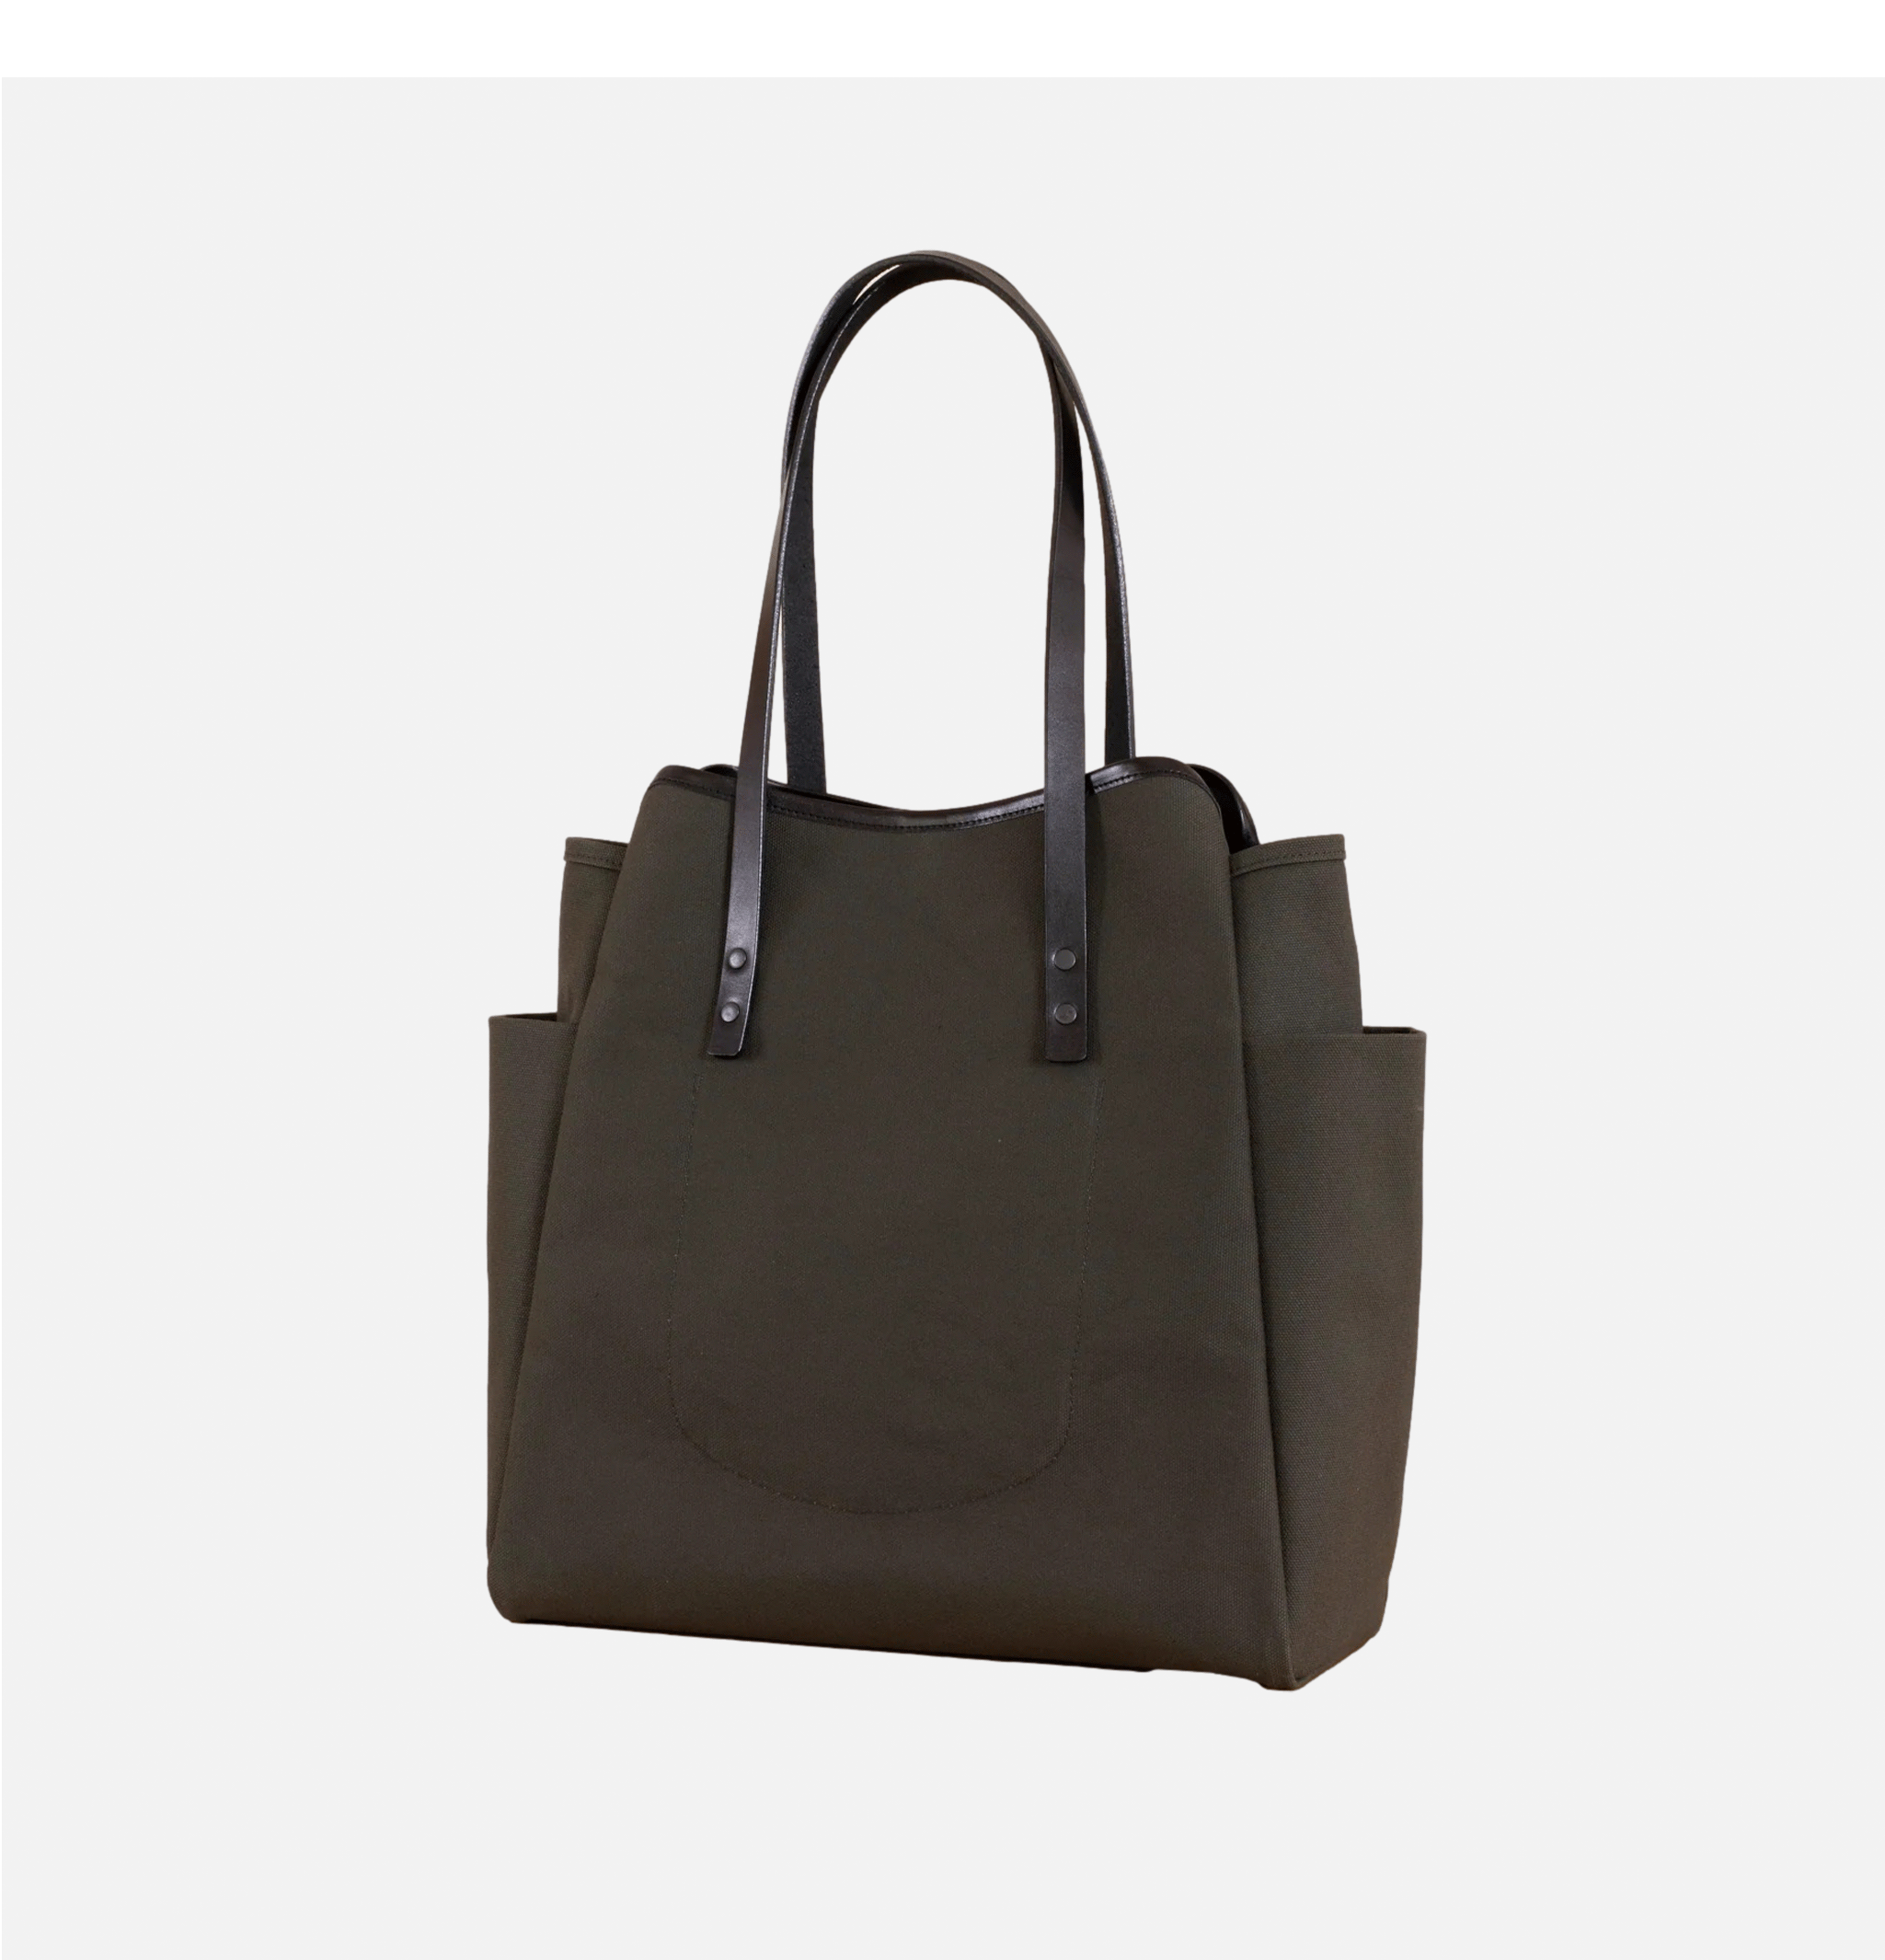 Southern Field Tote Bag Shopper Olive